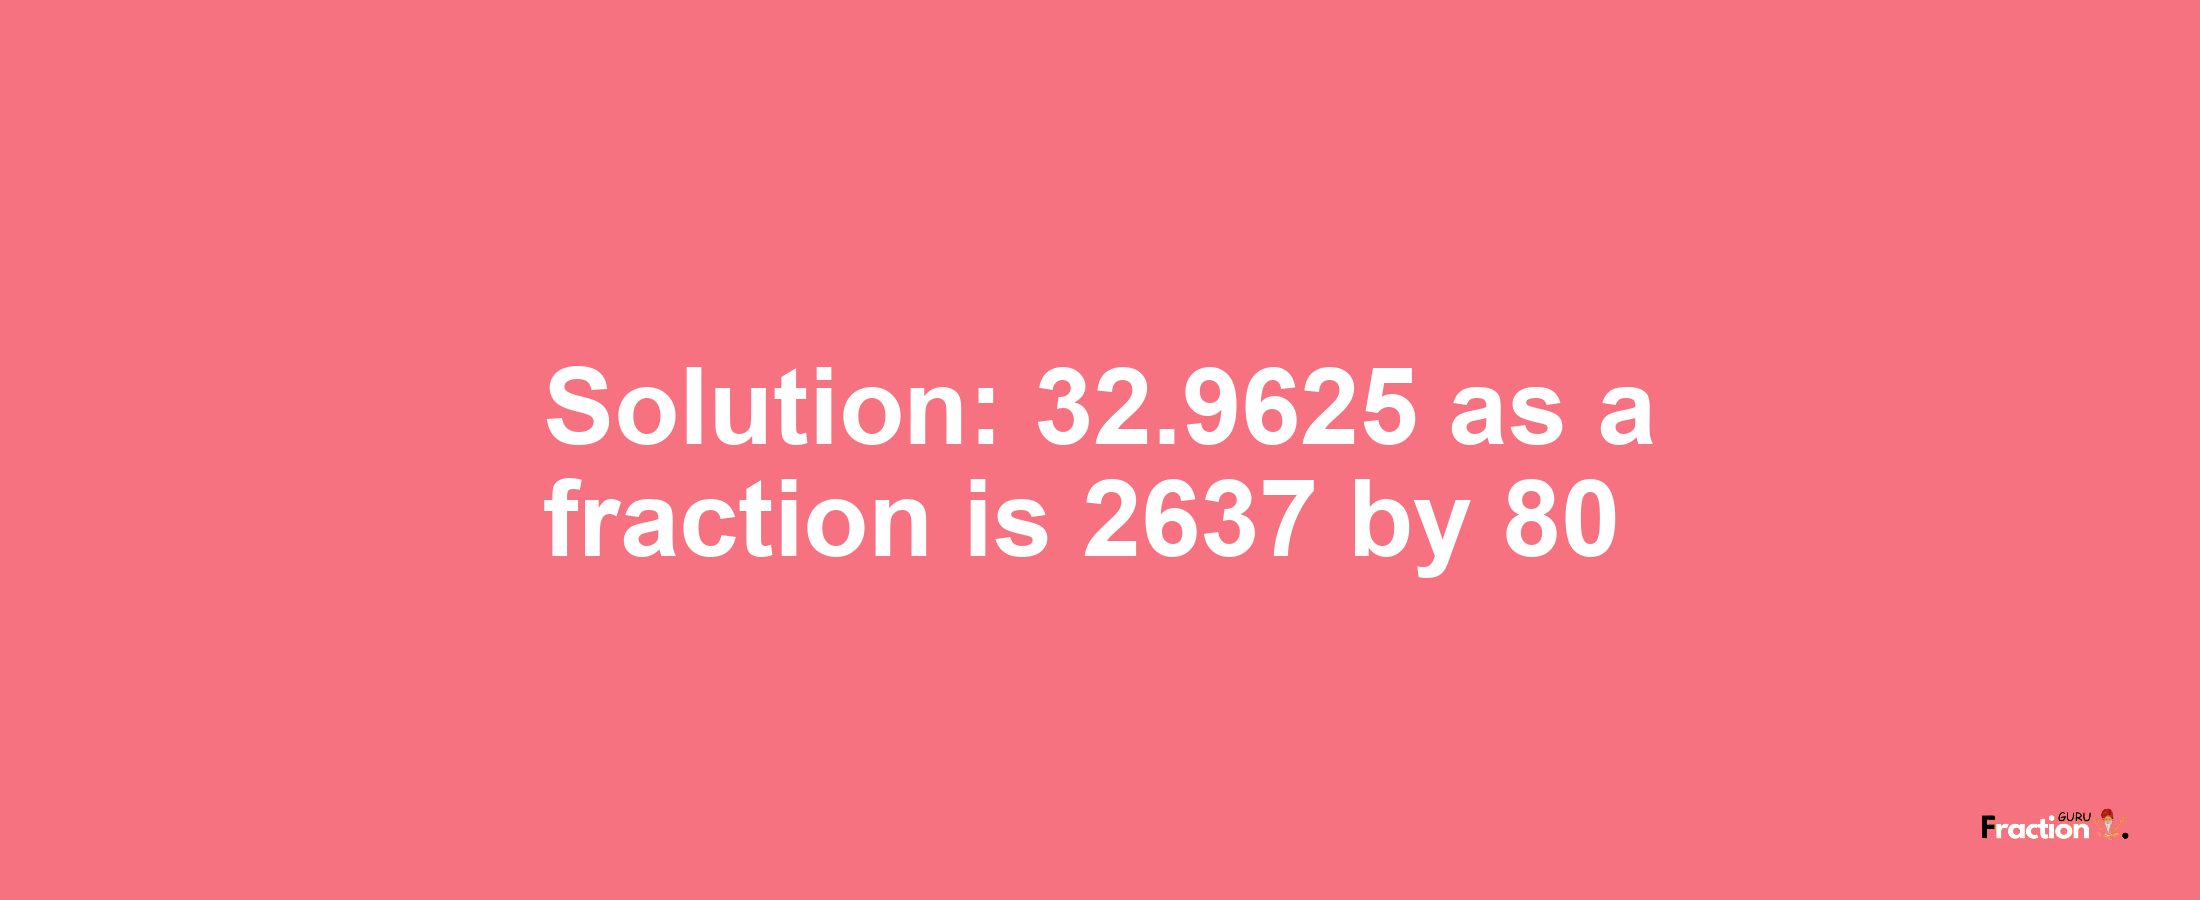 Solution:32.9625 as a fraction is 2637/80